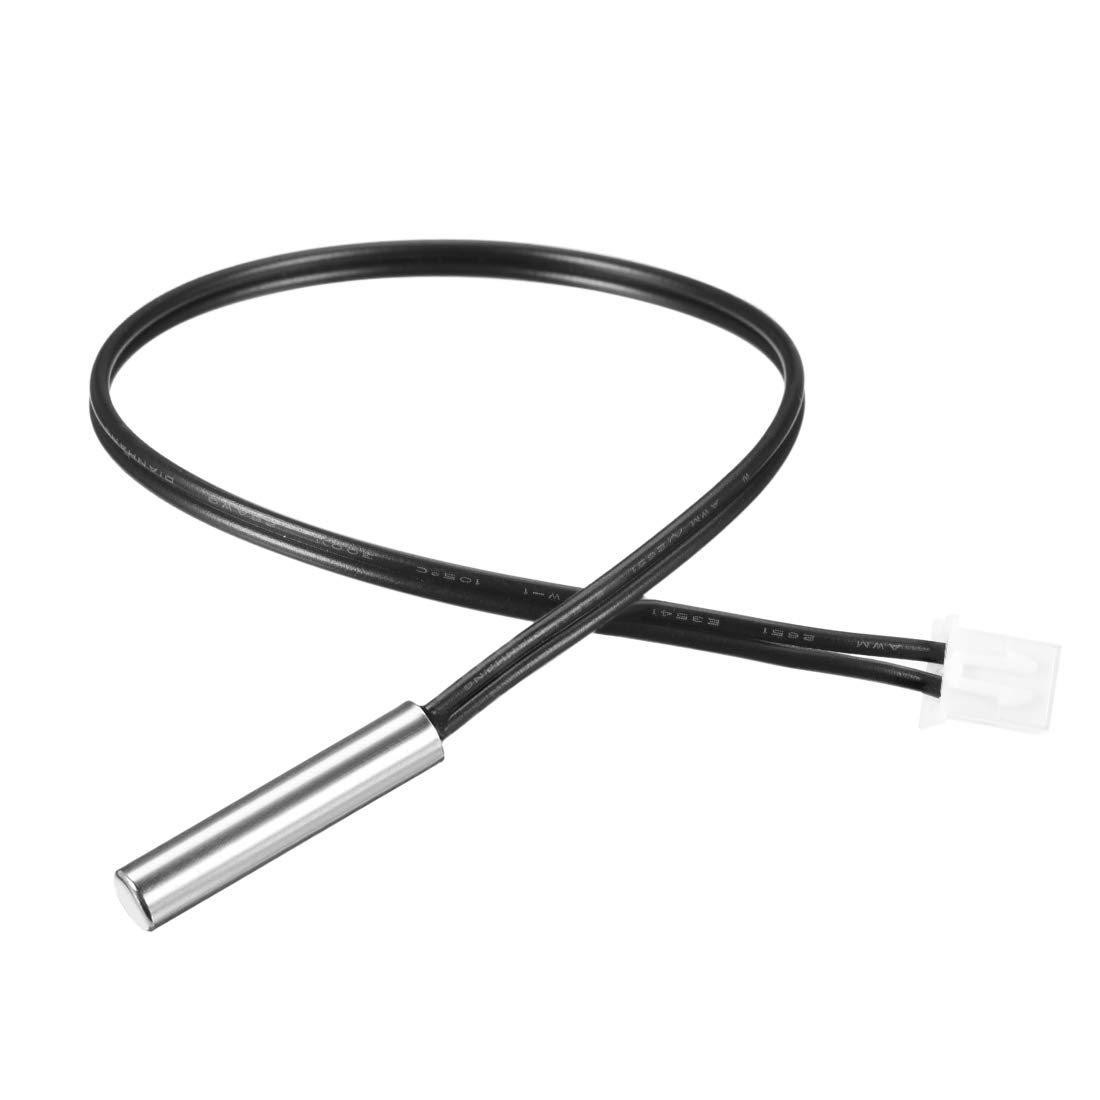 uxcell 10K NTC Thermistor Probe 11.8 Inch Stainless Steel Sensitive Temperature Temp Sensor for Air Conditioner